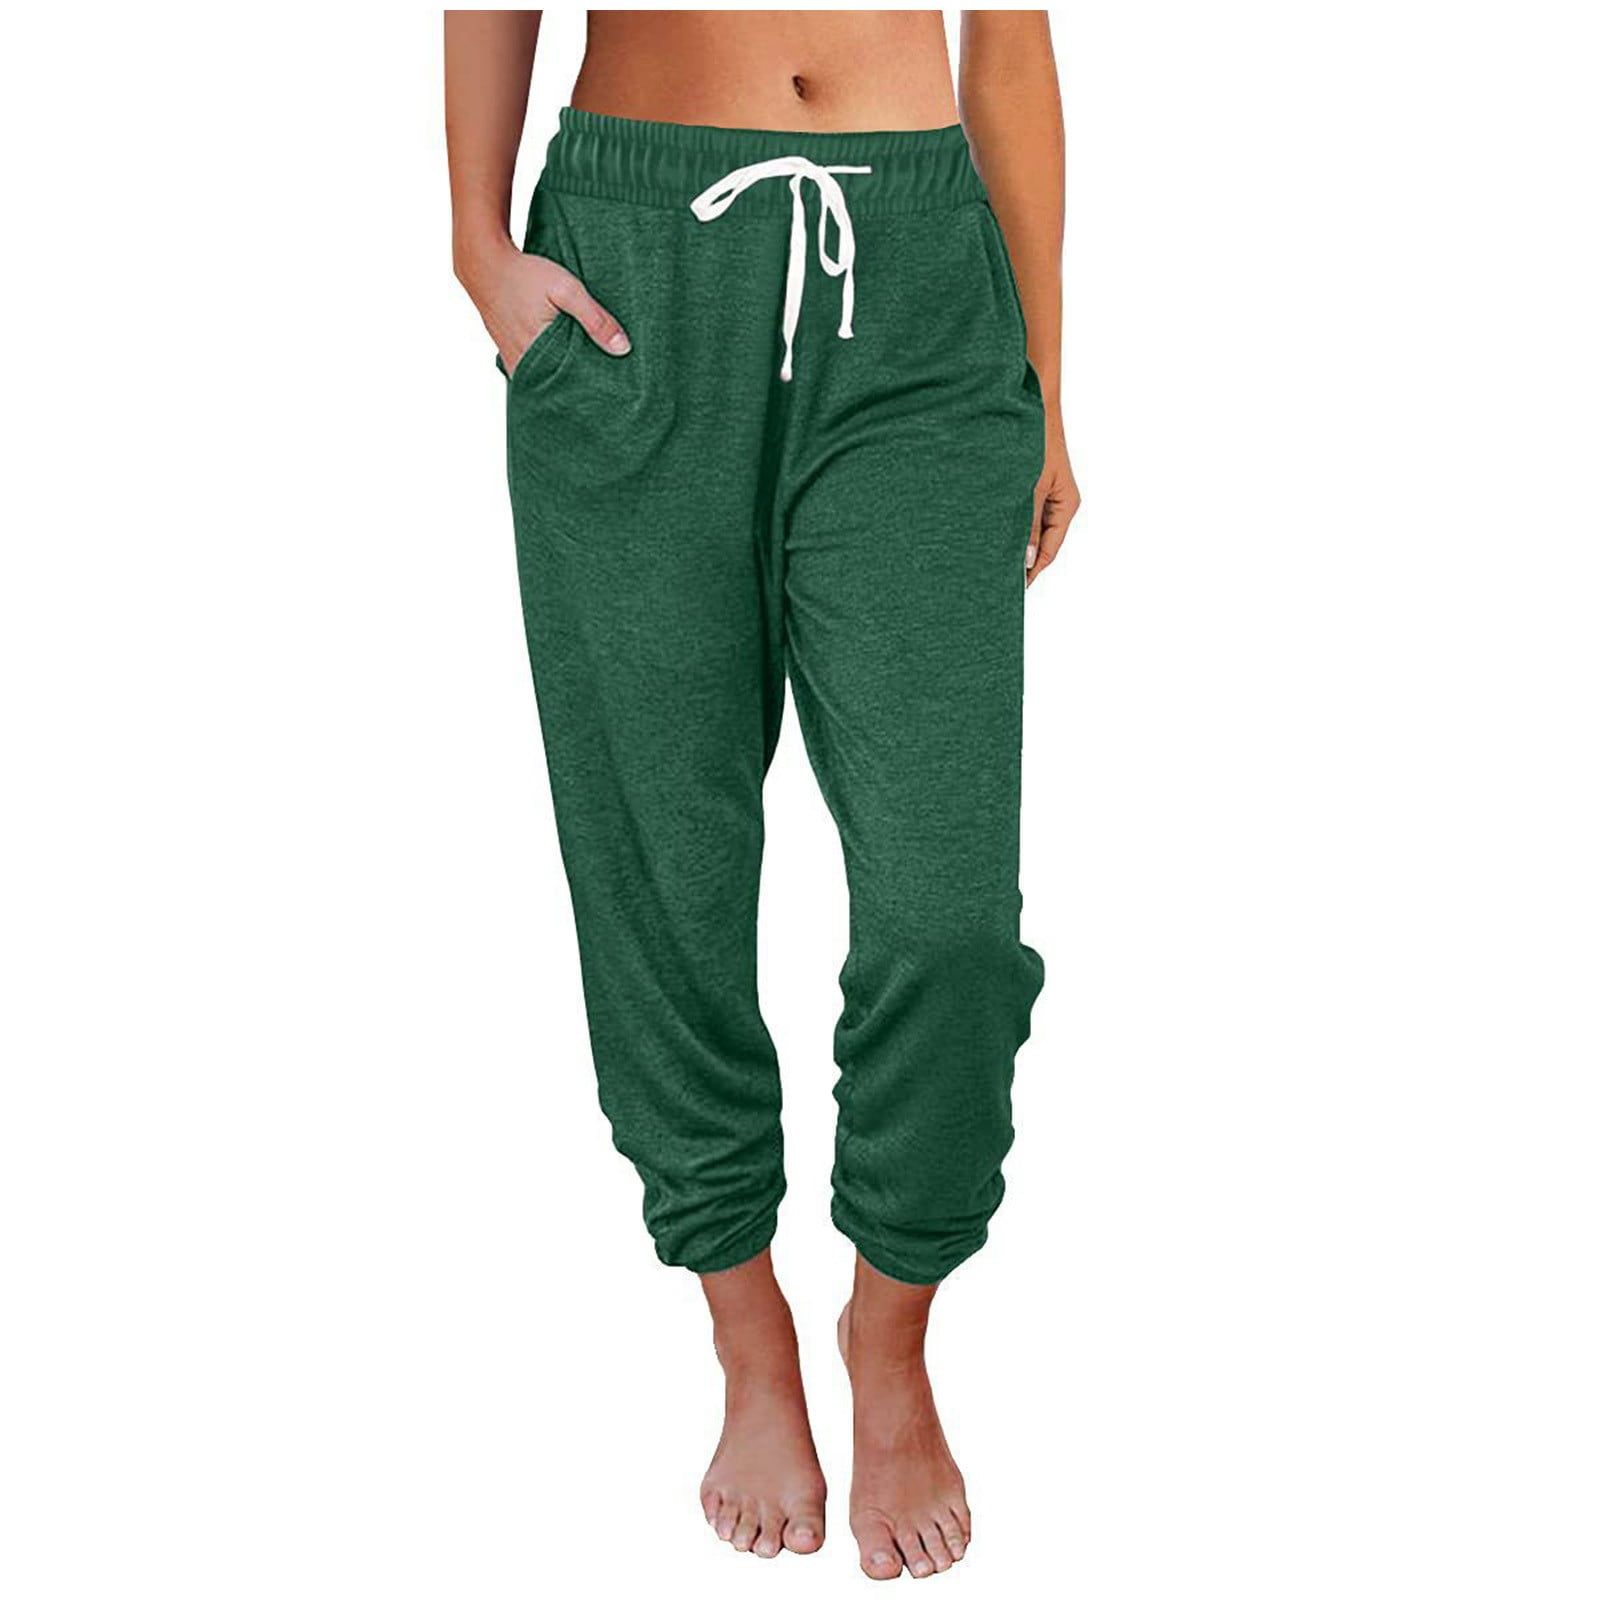 PMUYBHF Cargo Sweatpants for Women Open Bottom Women's Printed Cotton and  Linen Pockets Casual Fashion Pants Women Fashion Leggings for Women Capri